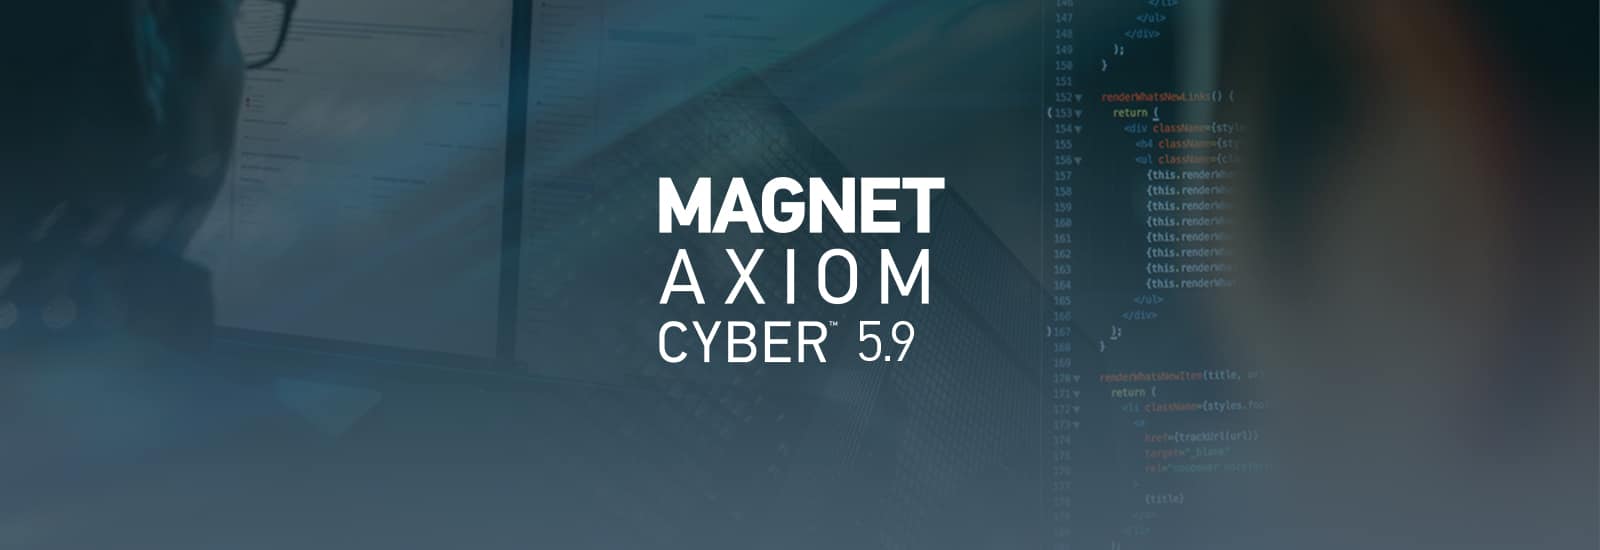 A decorative header for the Magnet AXIOM Cyber 5.9 release